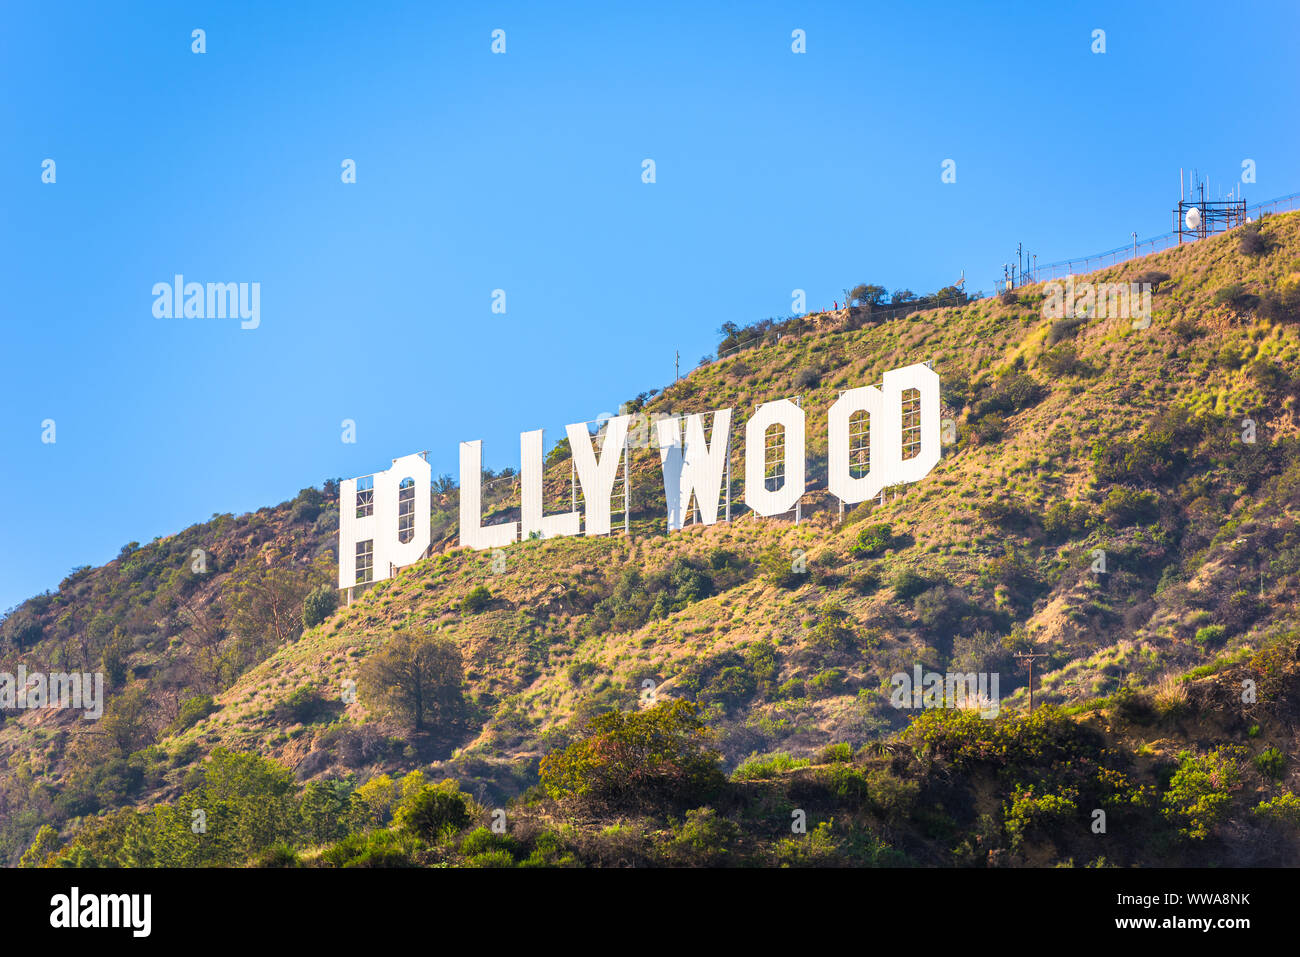 LOS ANGELES - FEBRUARY 29, 2016: The Hollywood sign on Mt. Lee. The iconic sign was originally created in 1923. Stock Photo